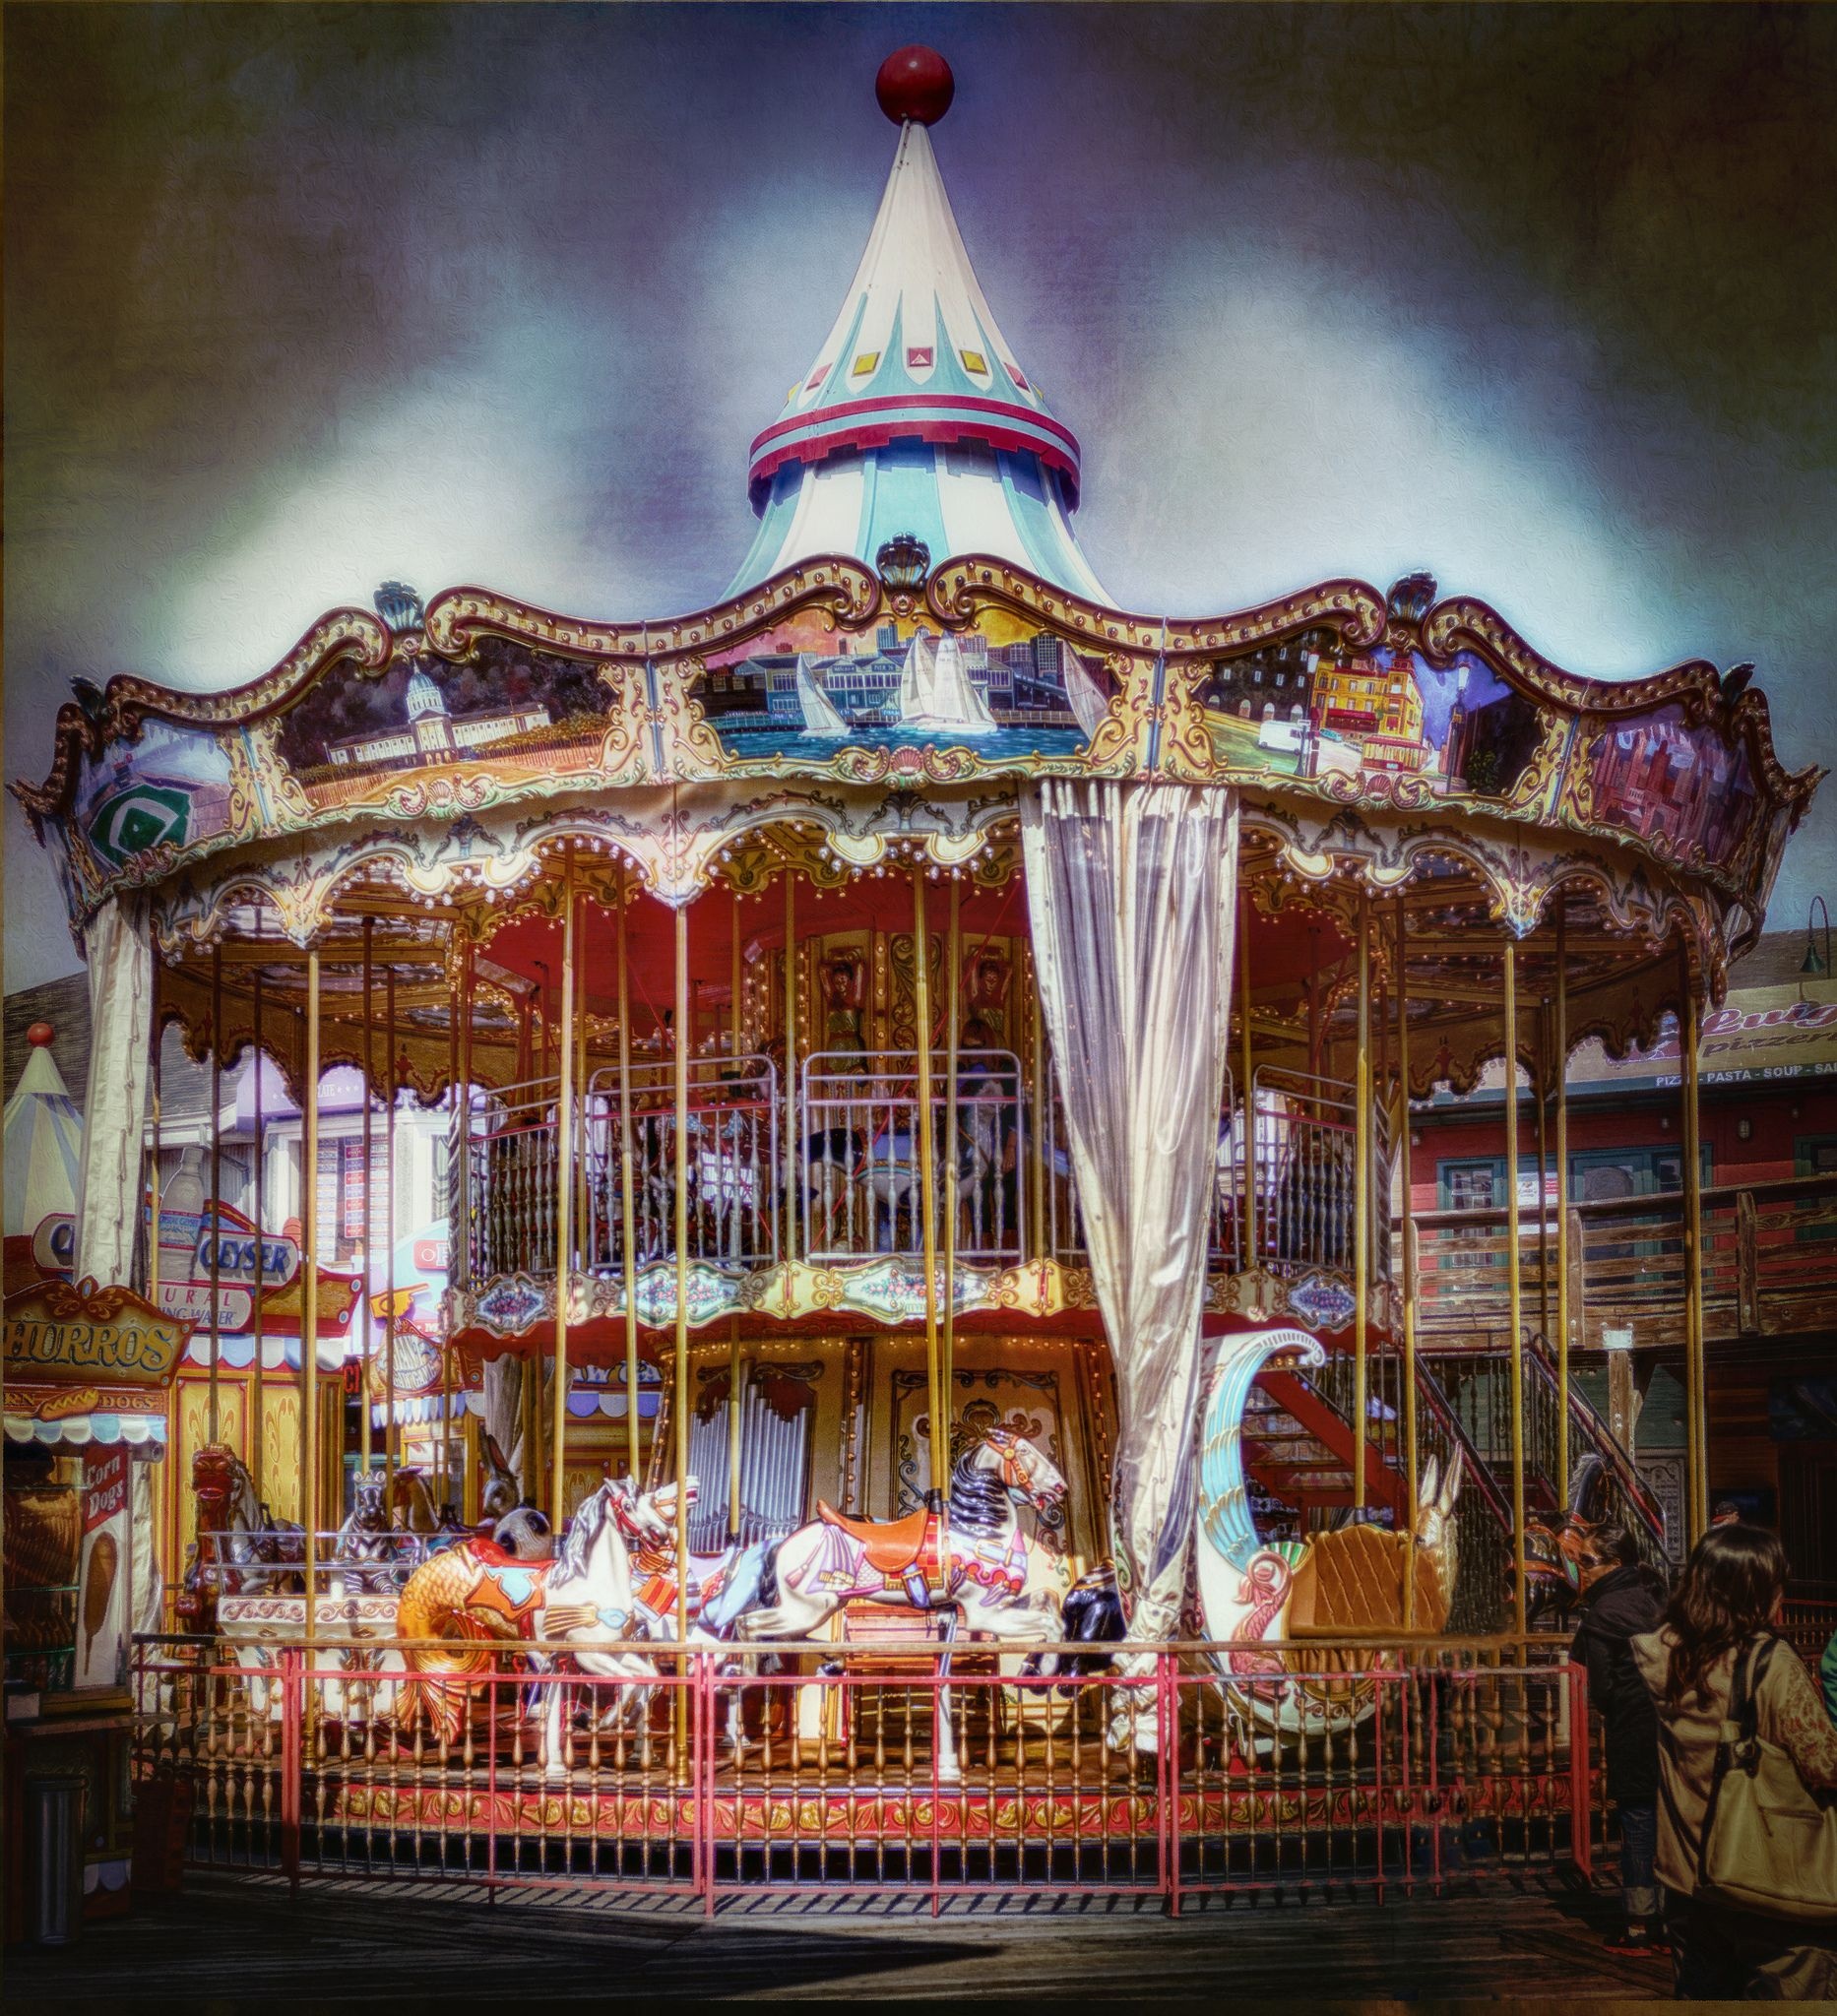 Merry-go-round, Don't you hear it?, 1870x2050 HD Handy